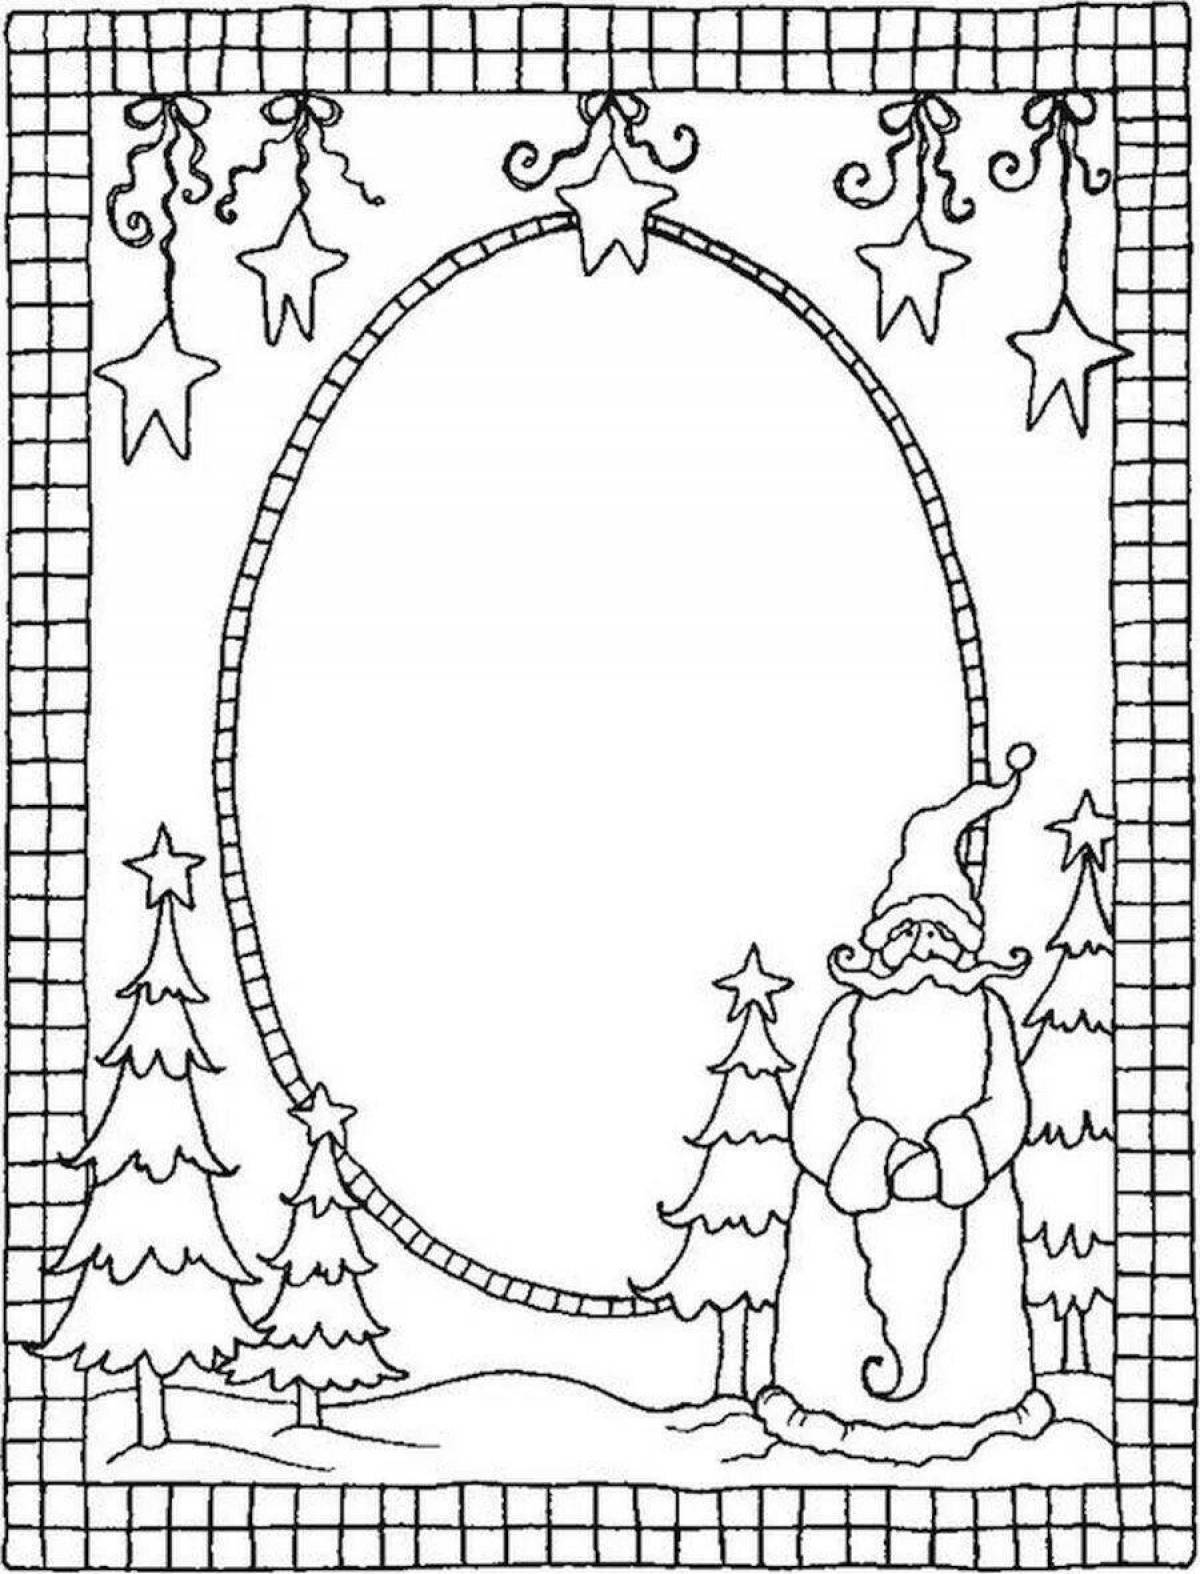 Decorated Christmas card template